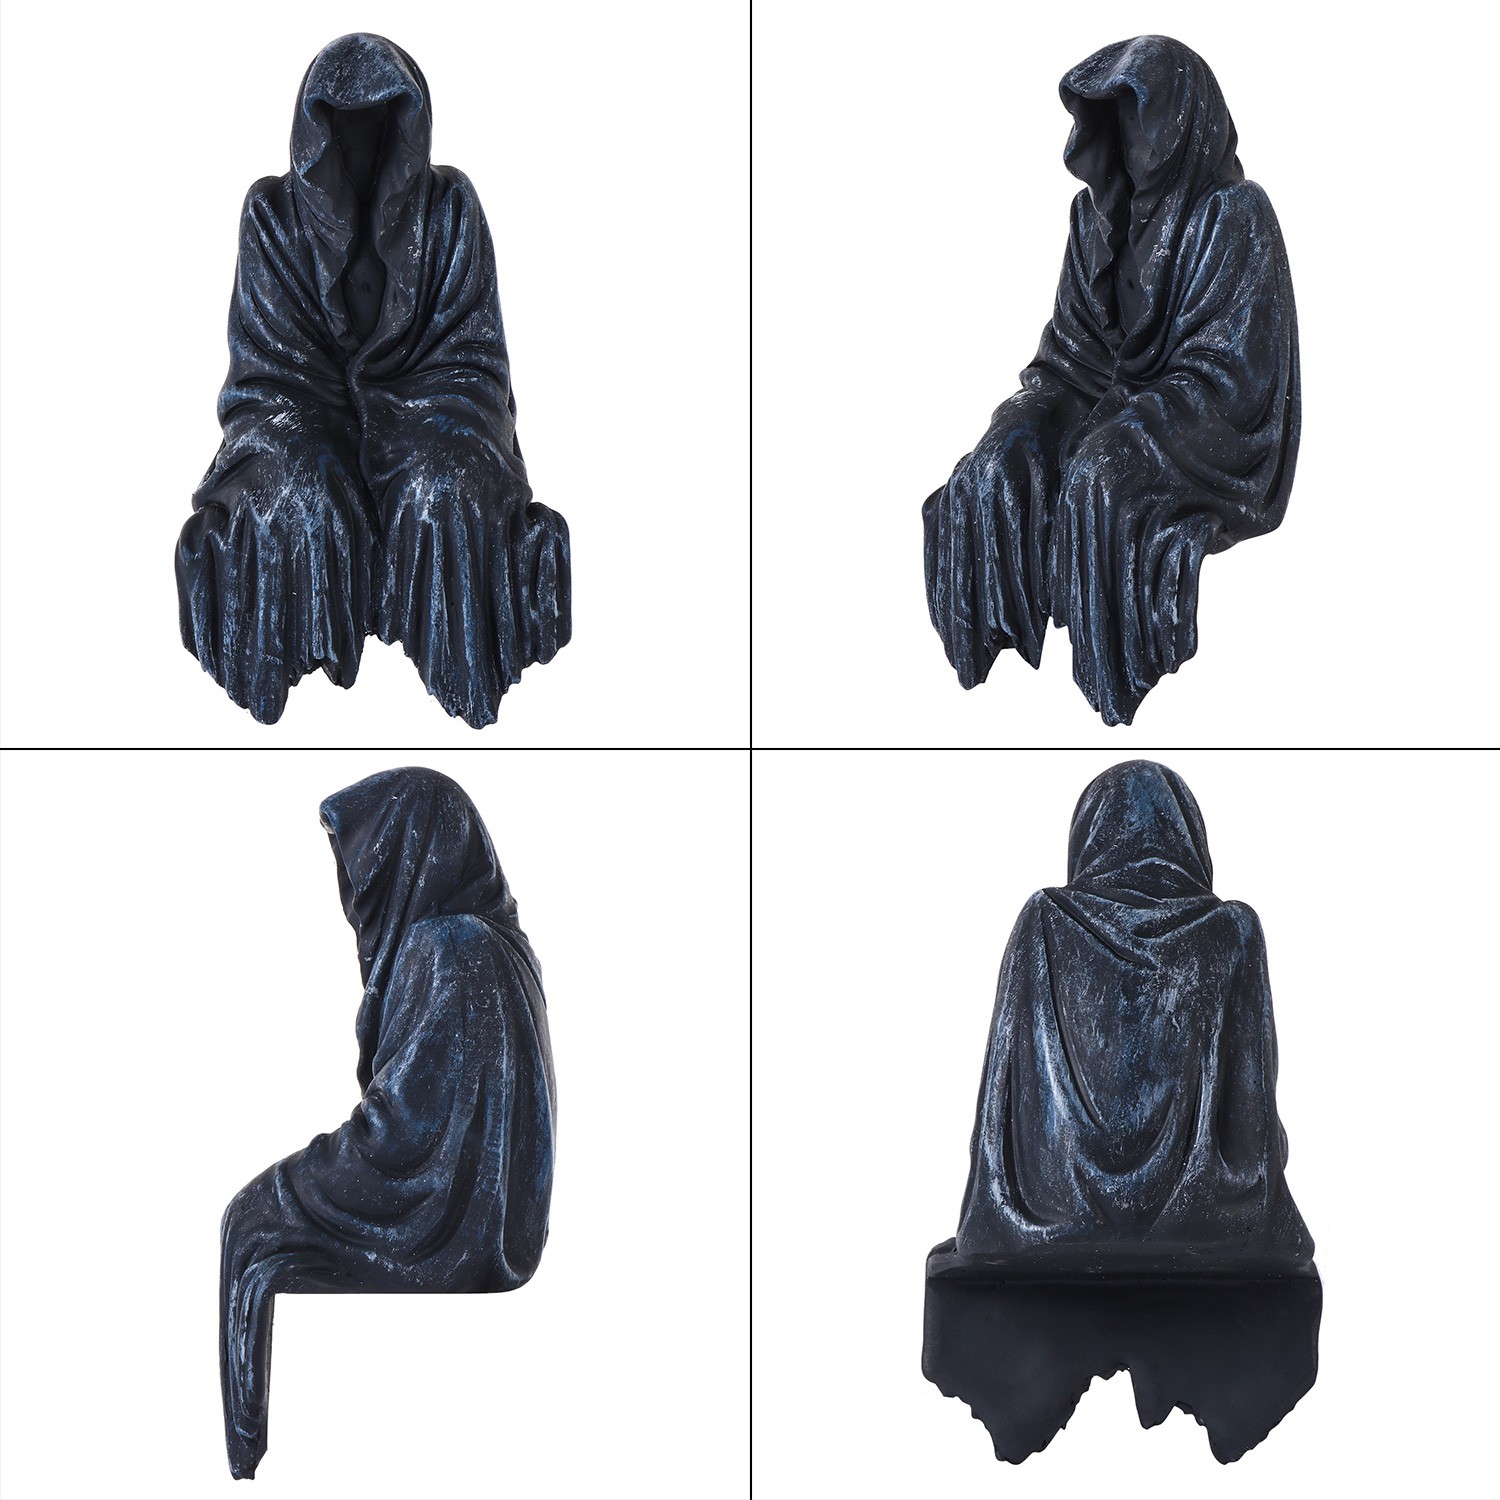 QINJUE Reaping Gothic Sculpture Sitting Gothic Sculpture Solace Reaper Desktop Ornament Resin Crafts Creeper